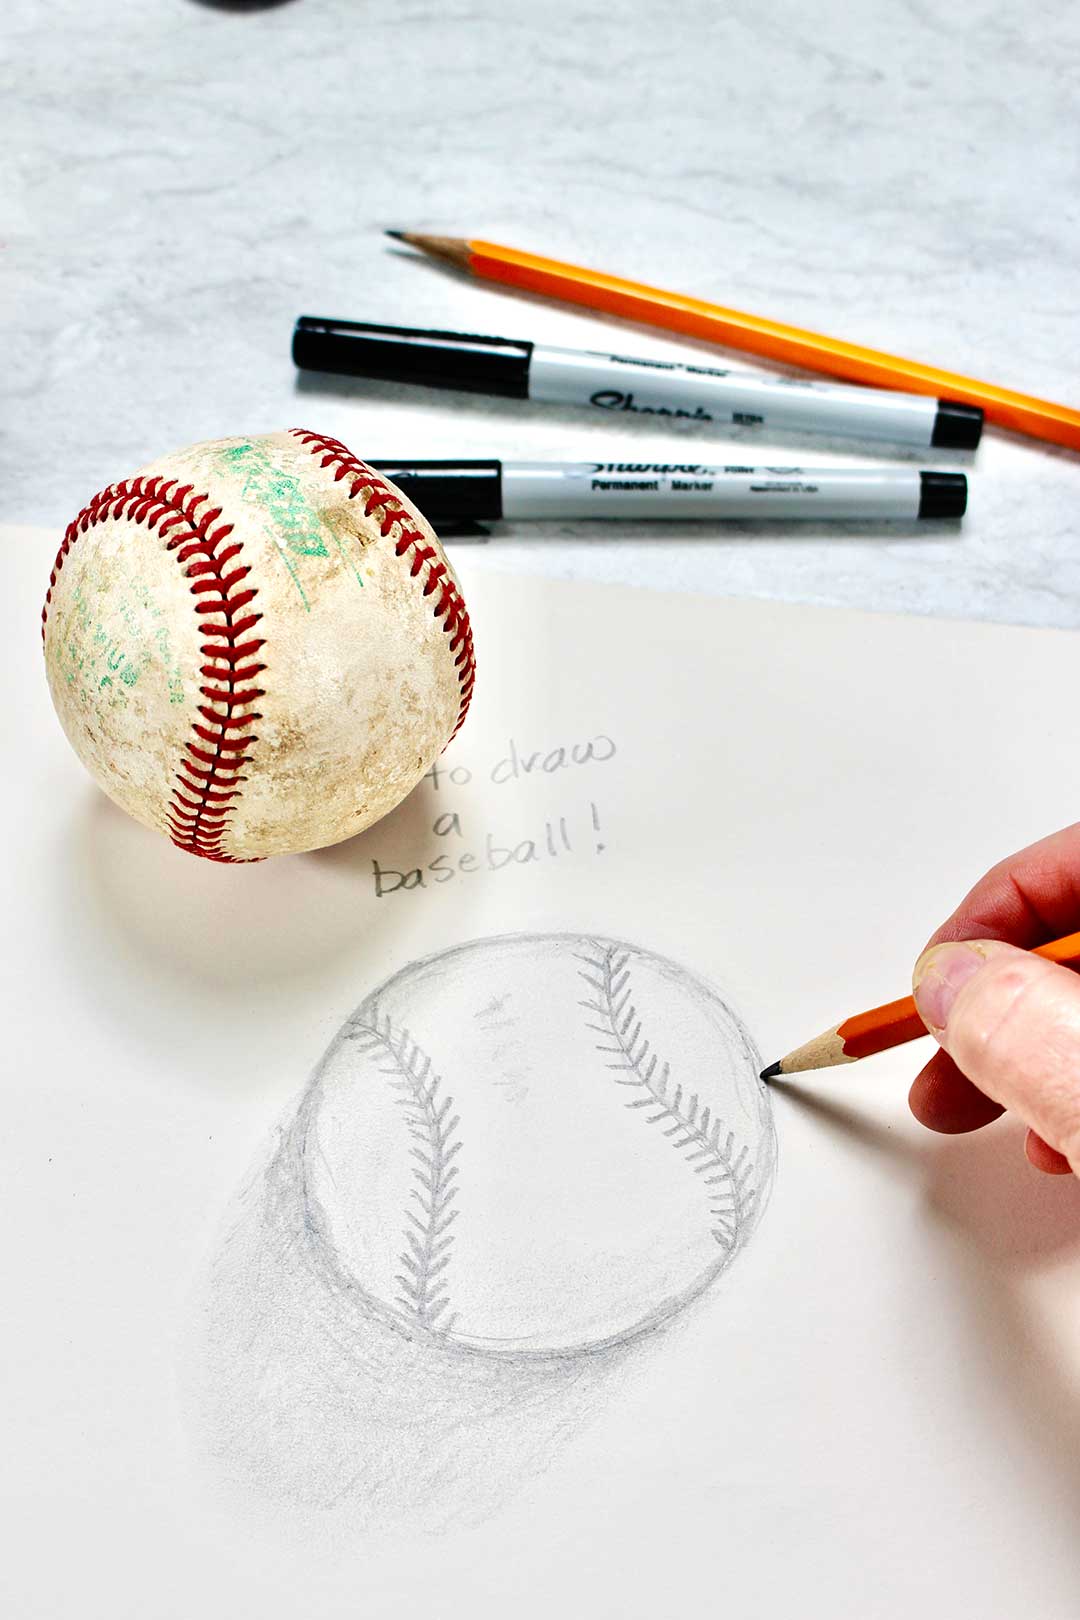 Close up drawing of baseball with hand holding pencil. Baseball, sharpies and additional pencil in background.